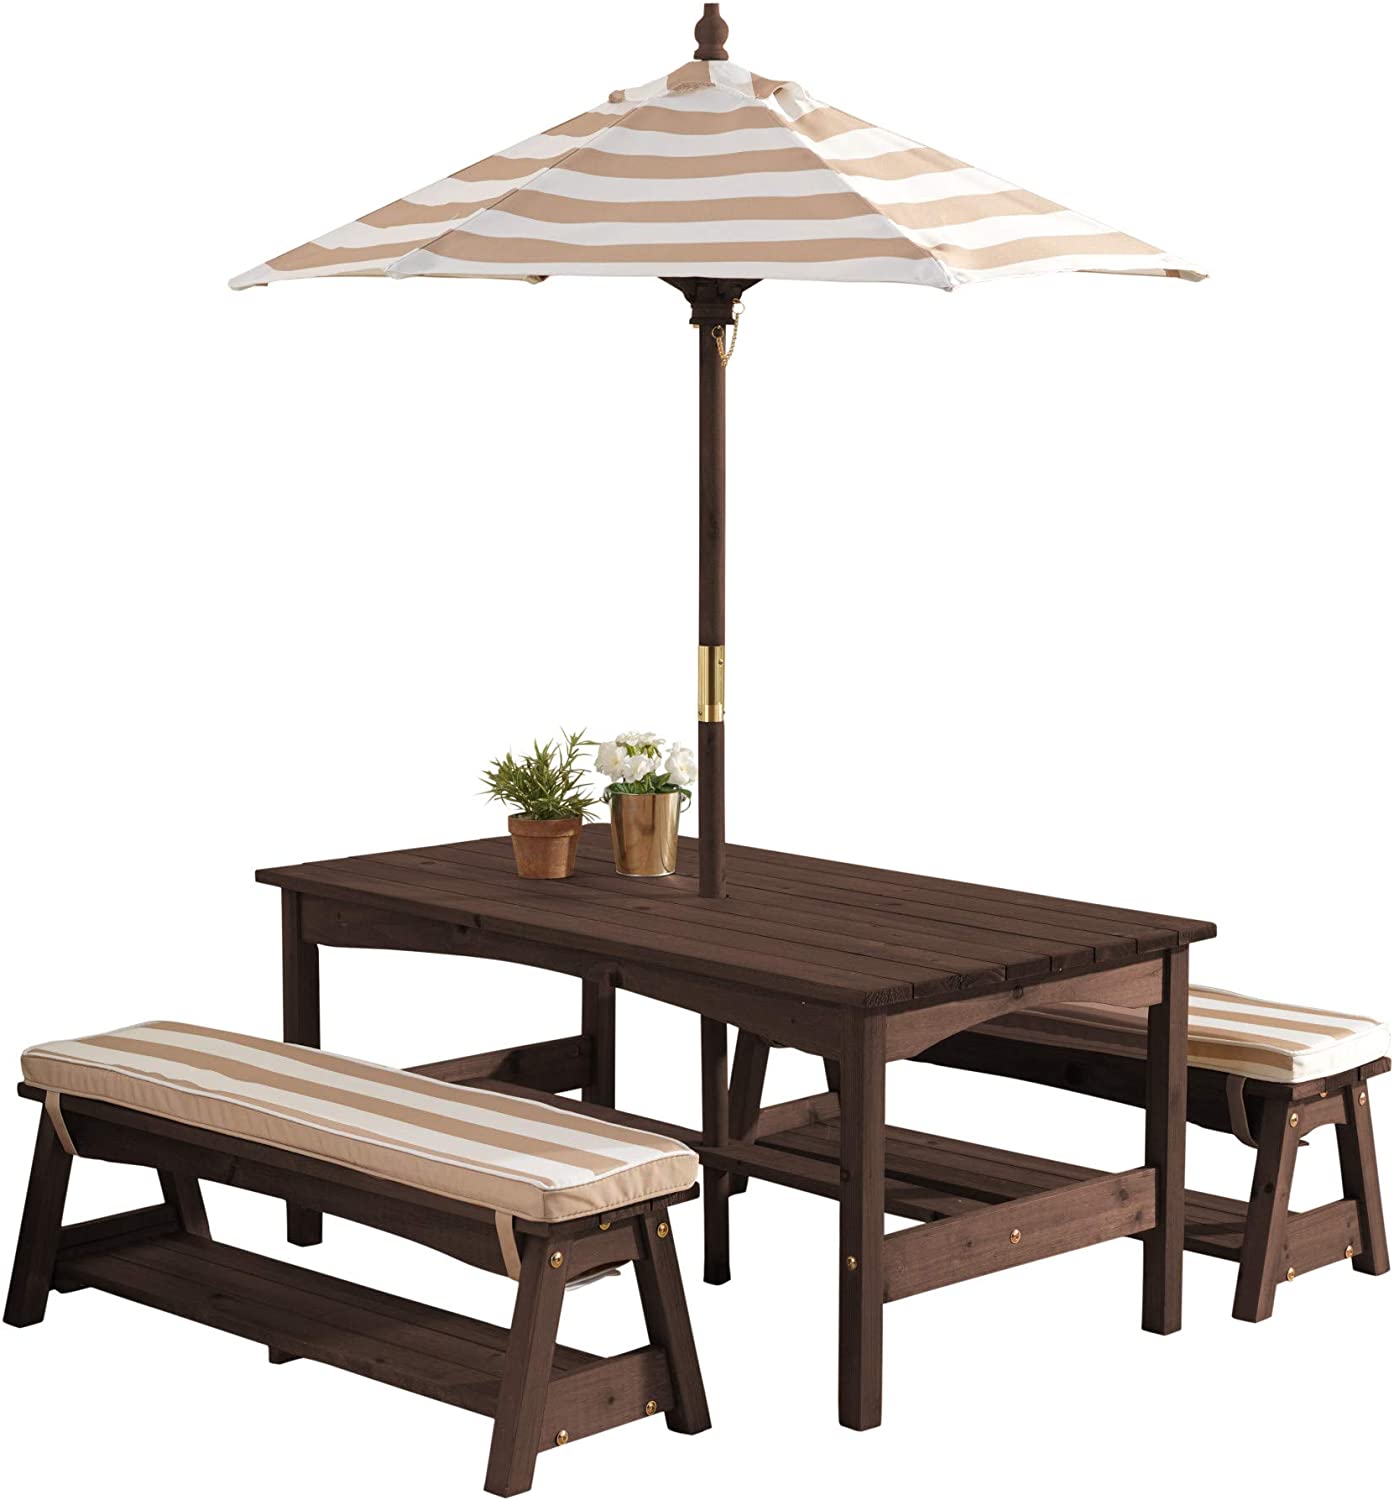 KidKraft Shaded Patio Wood Kid’s Outdoor Table & Chairs Bench Set